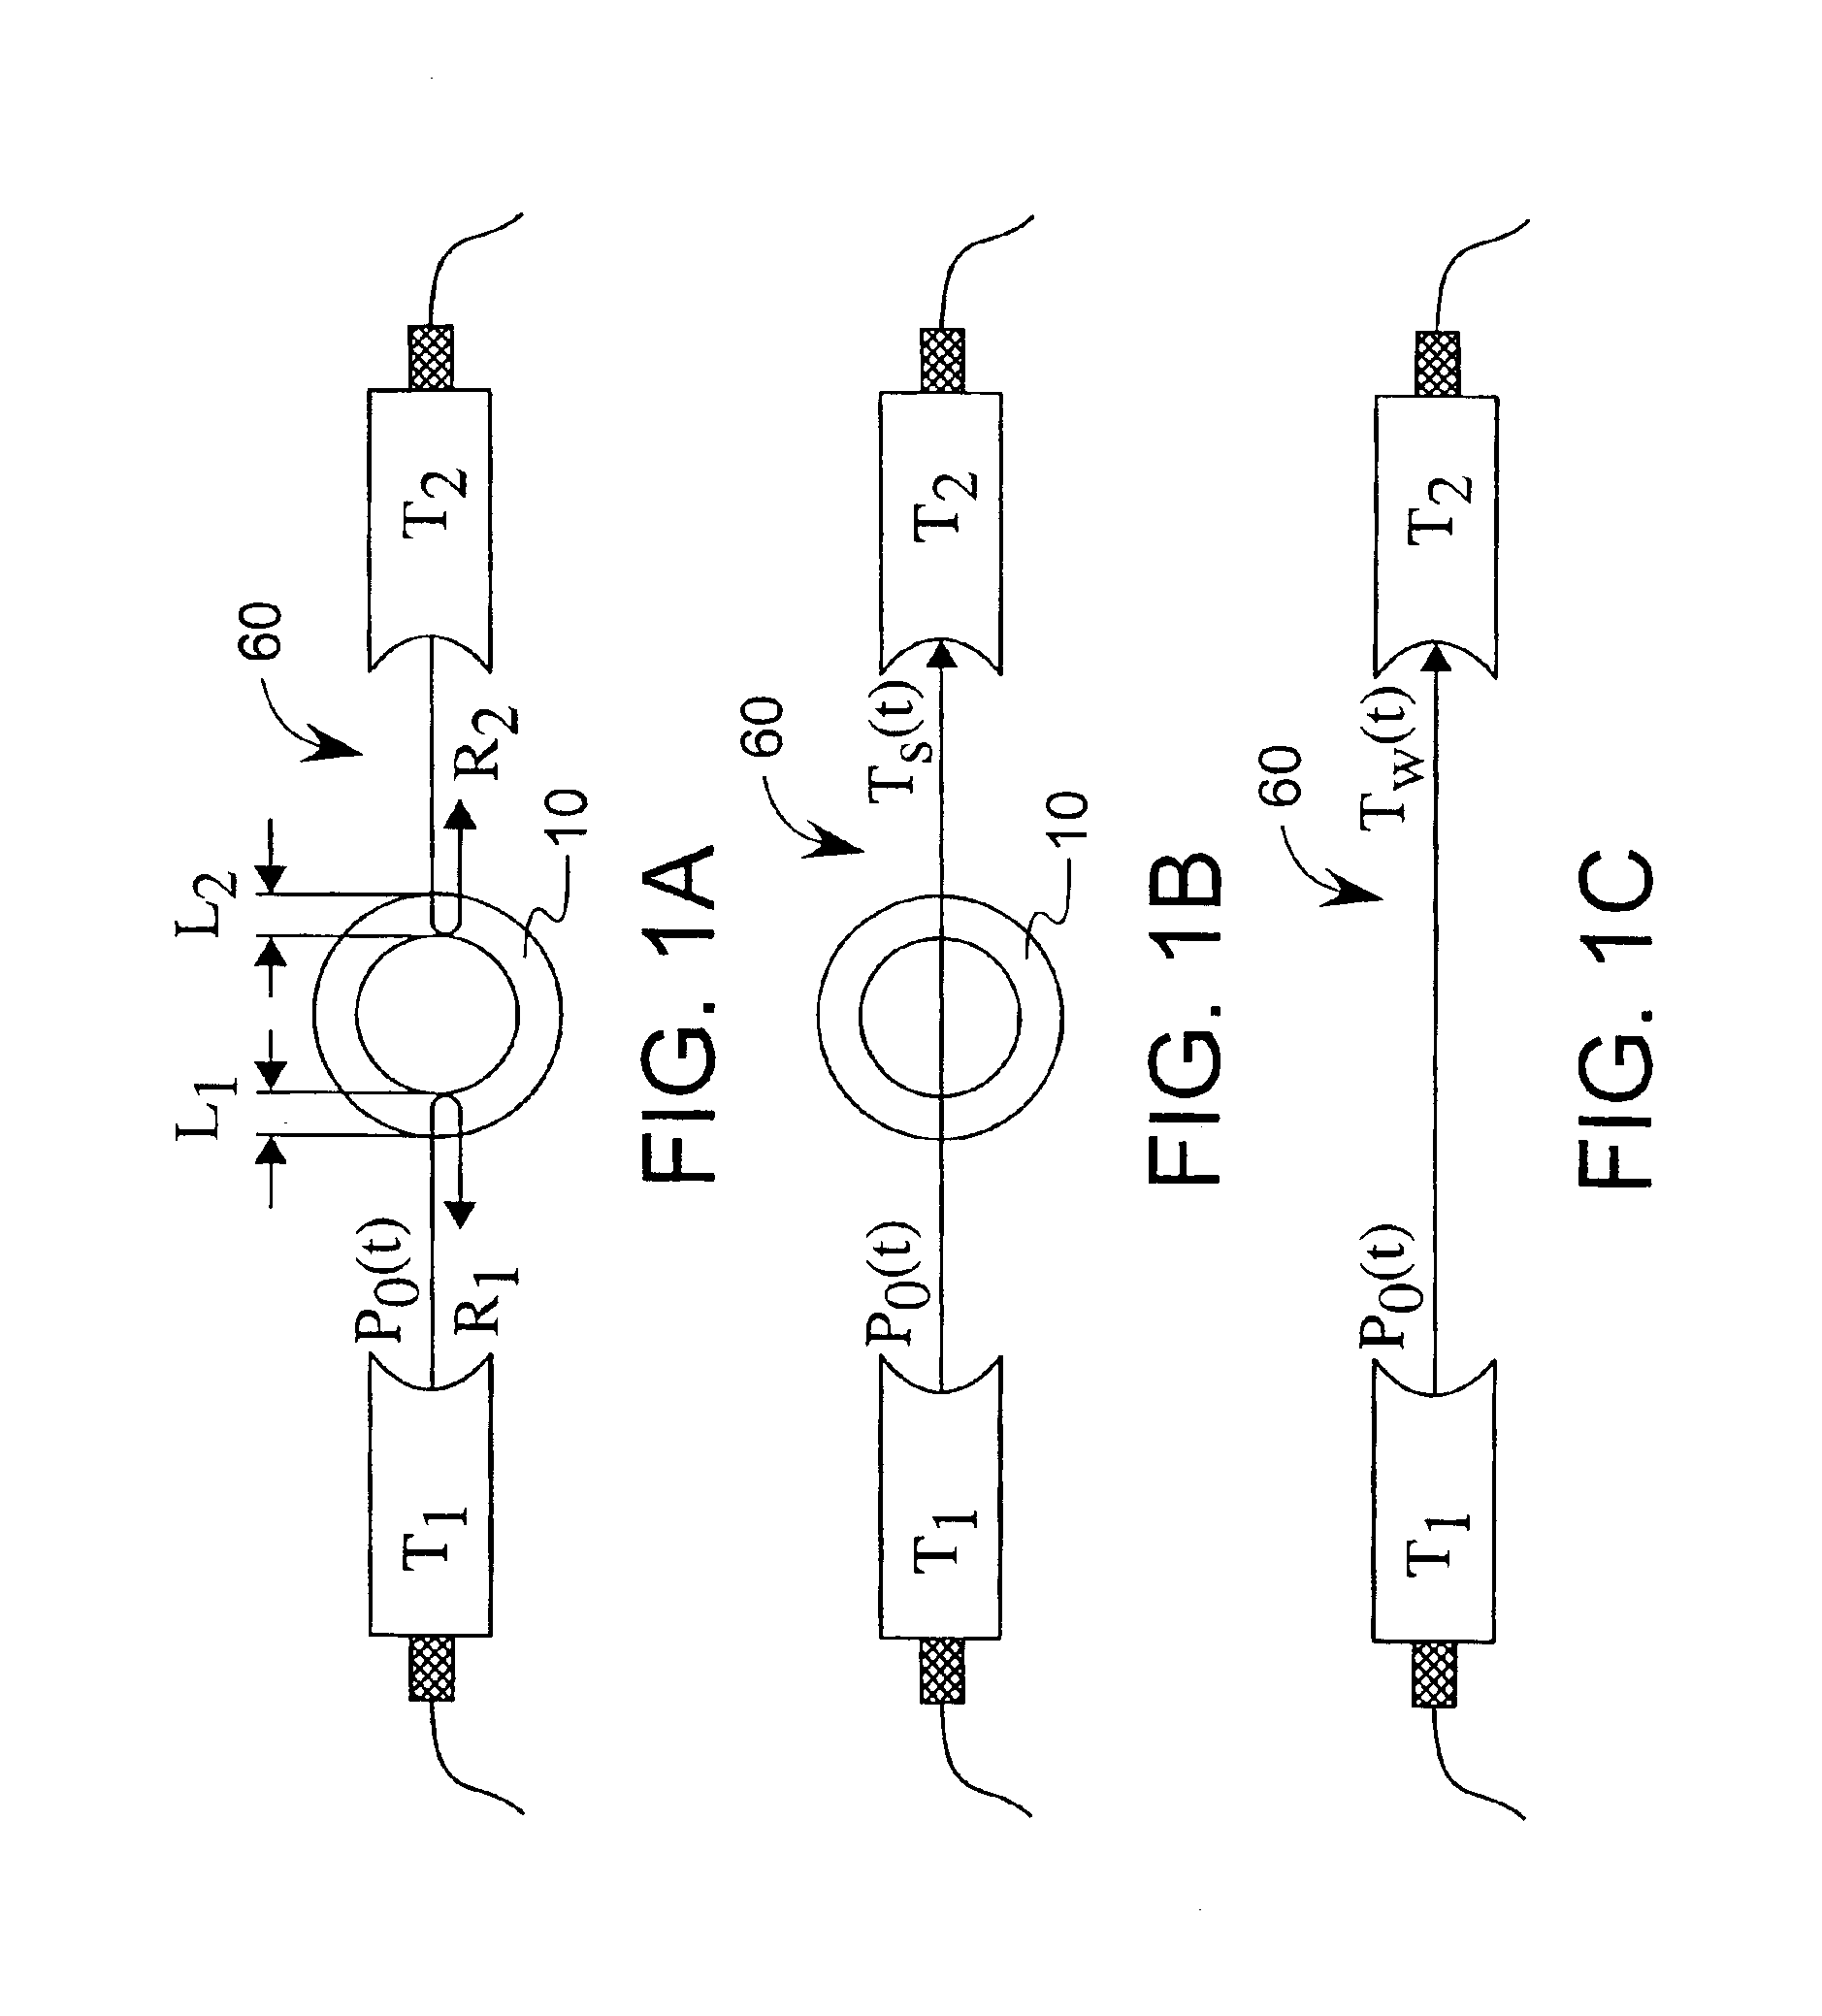 Method for determining the wall thickness and the speed of sound in a tube from reflected and transmitted ultrasound pulses